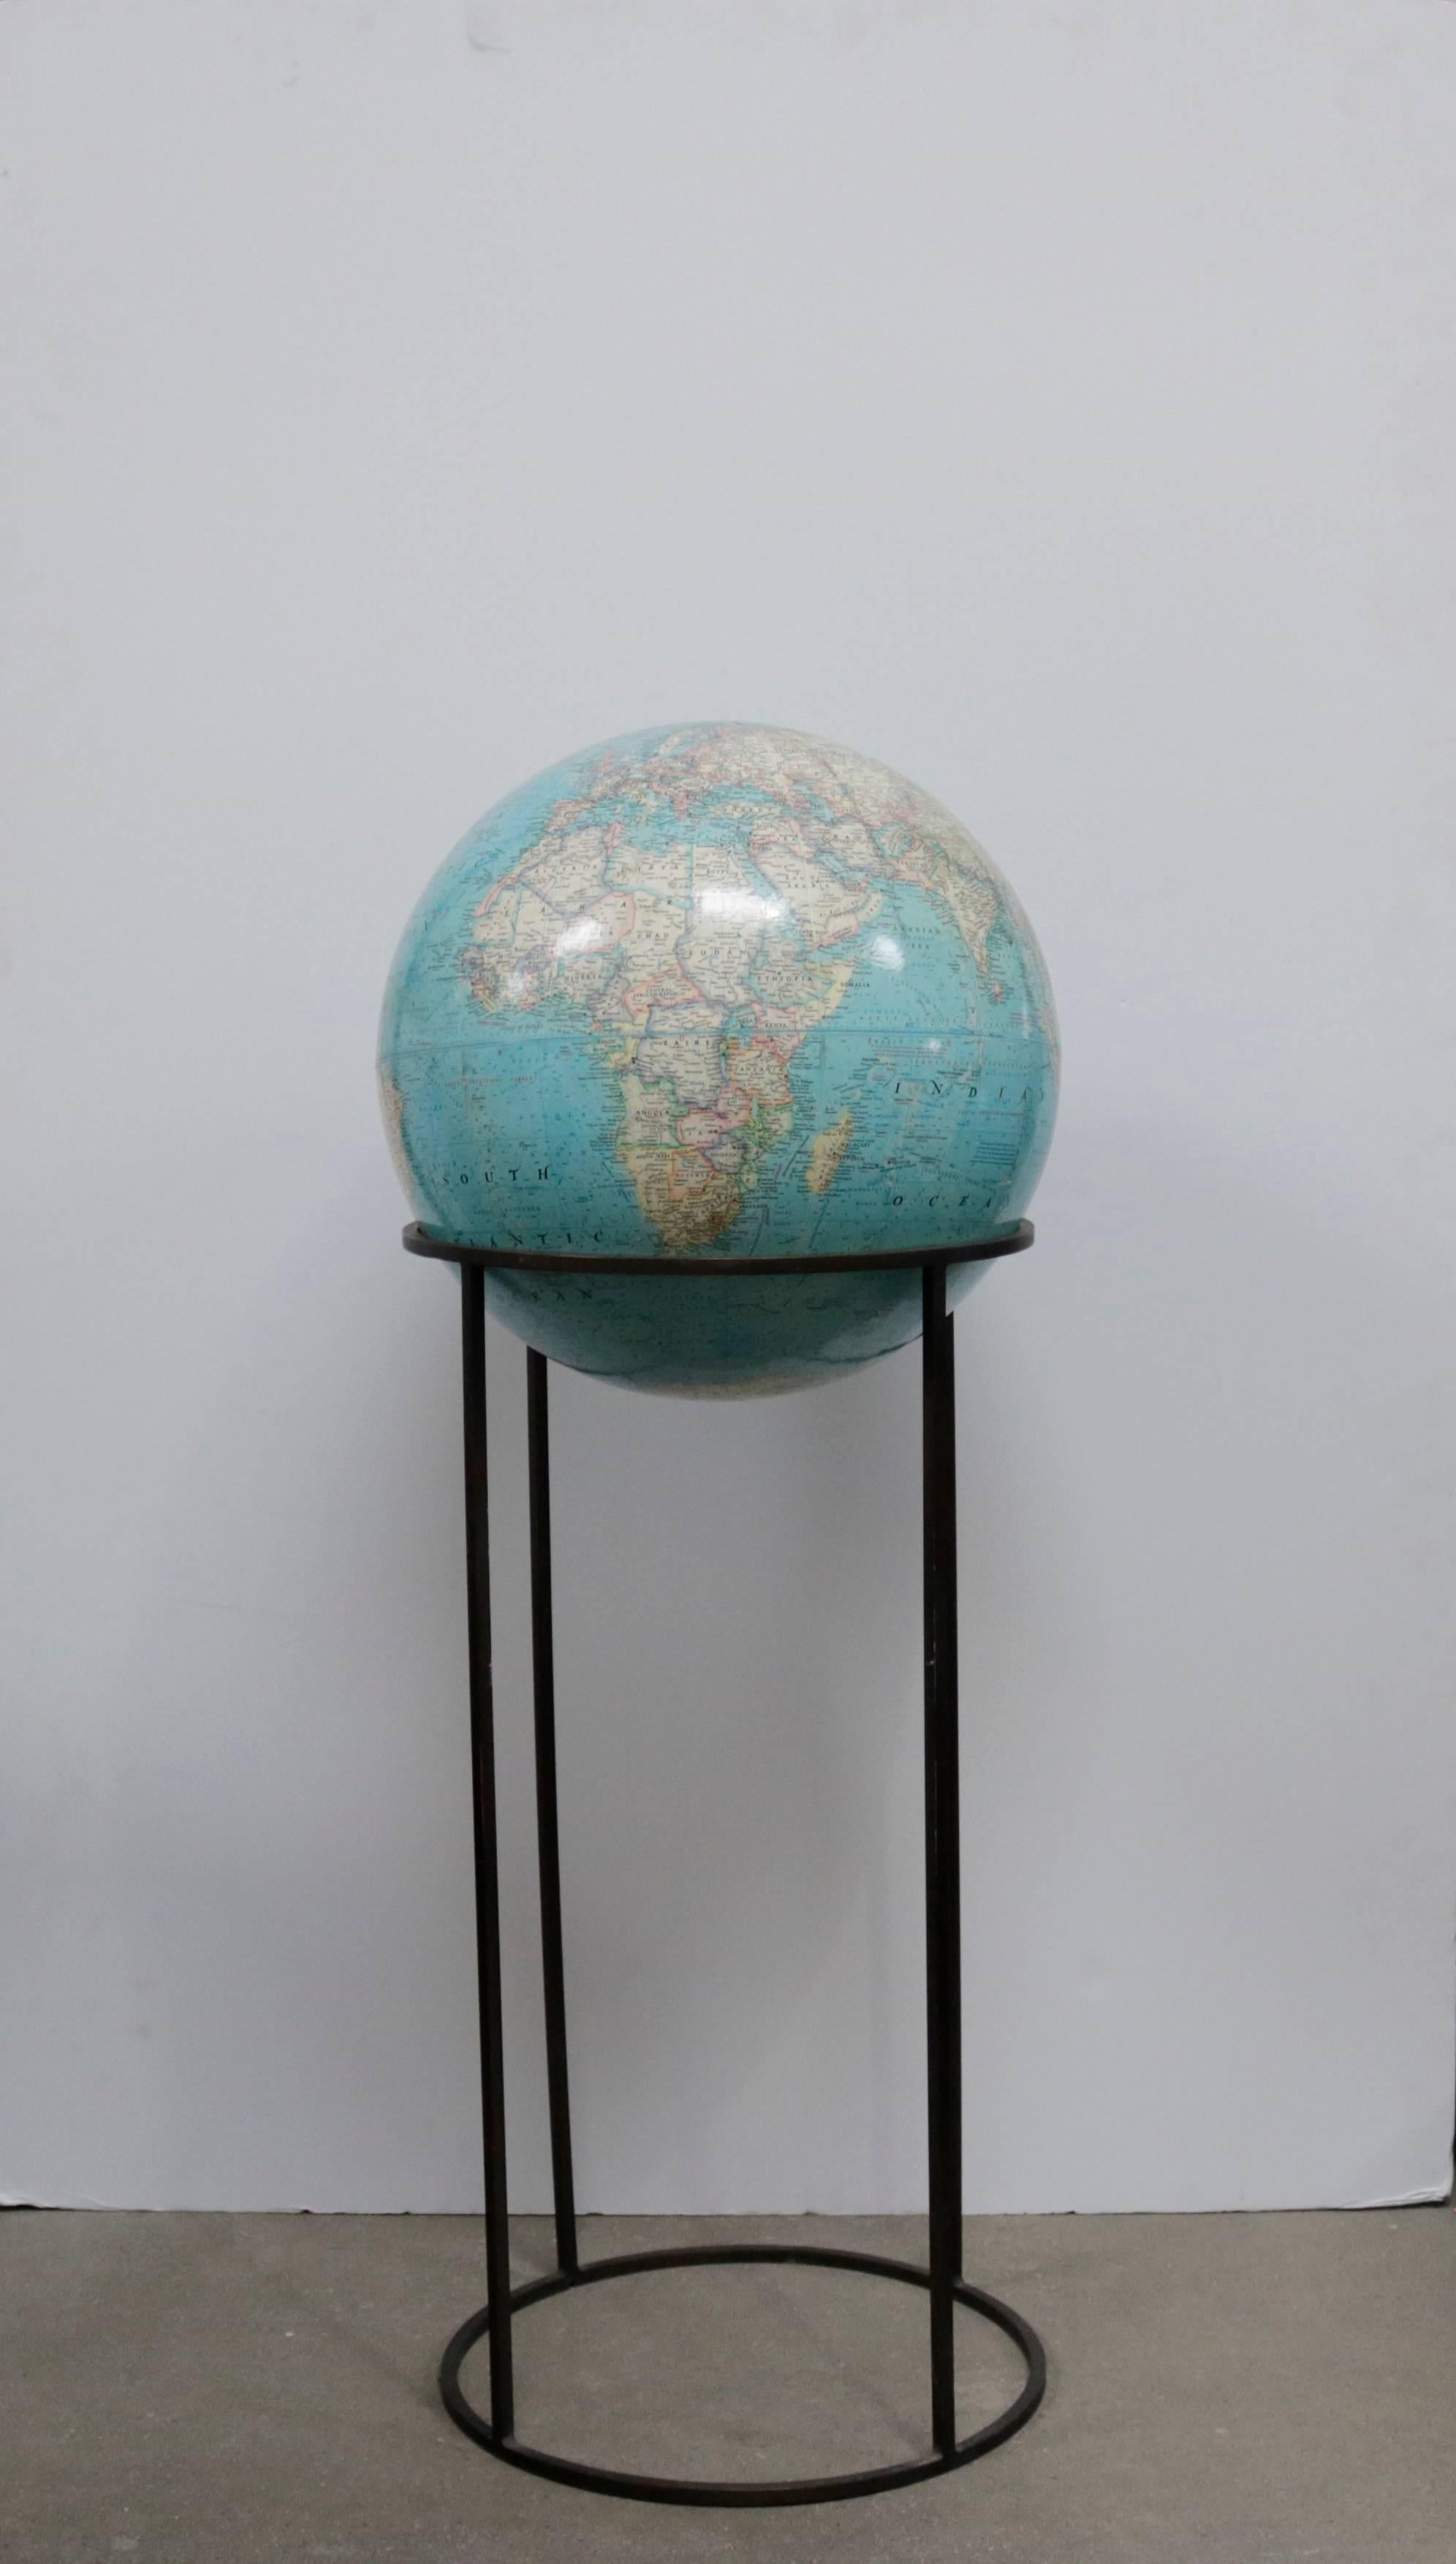 Rotating globe from the National Geographic Society, circa 1974. Sits in its original three pole base brass stand.
What I like about this globe is that you can take it into your hands and feels that the world belongs to you!